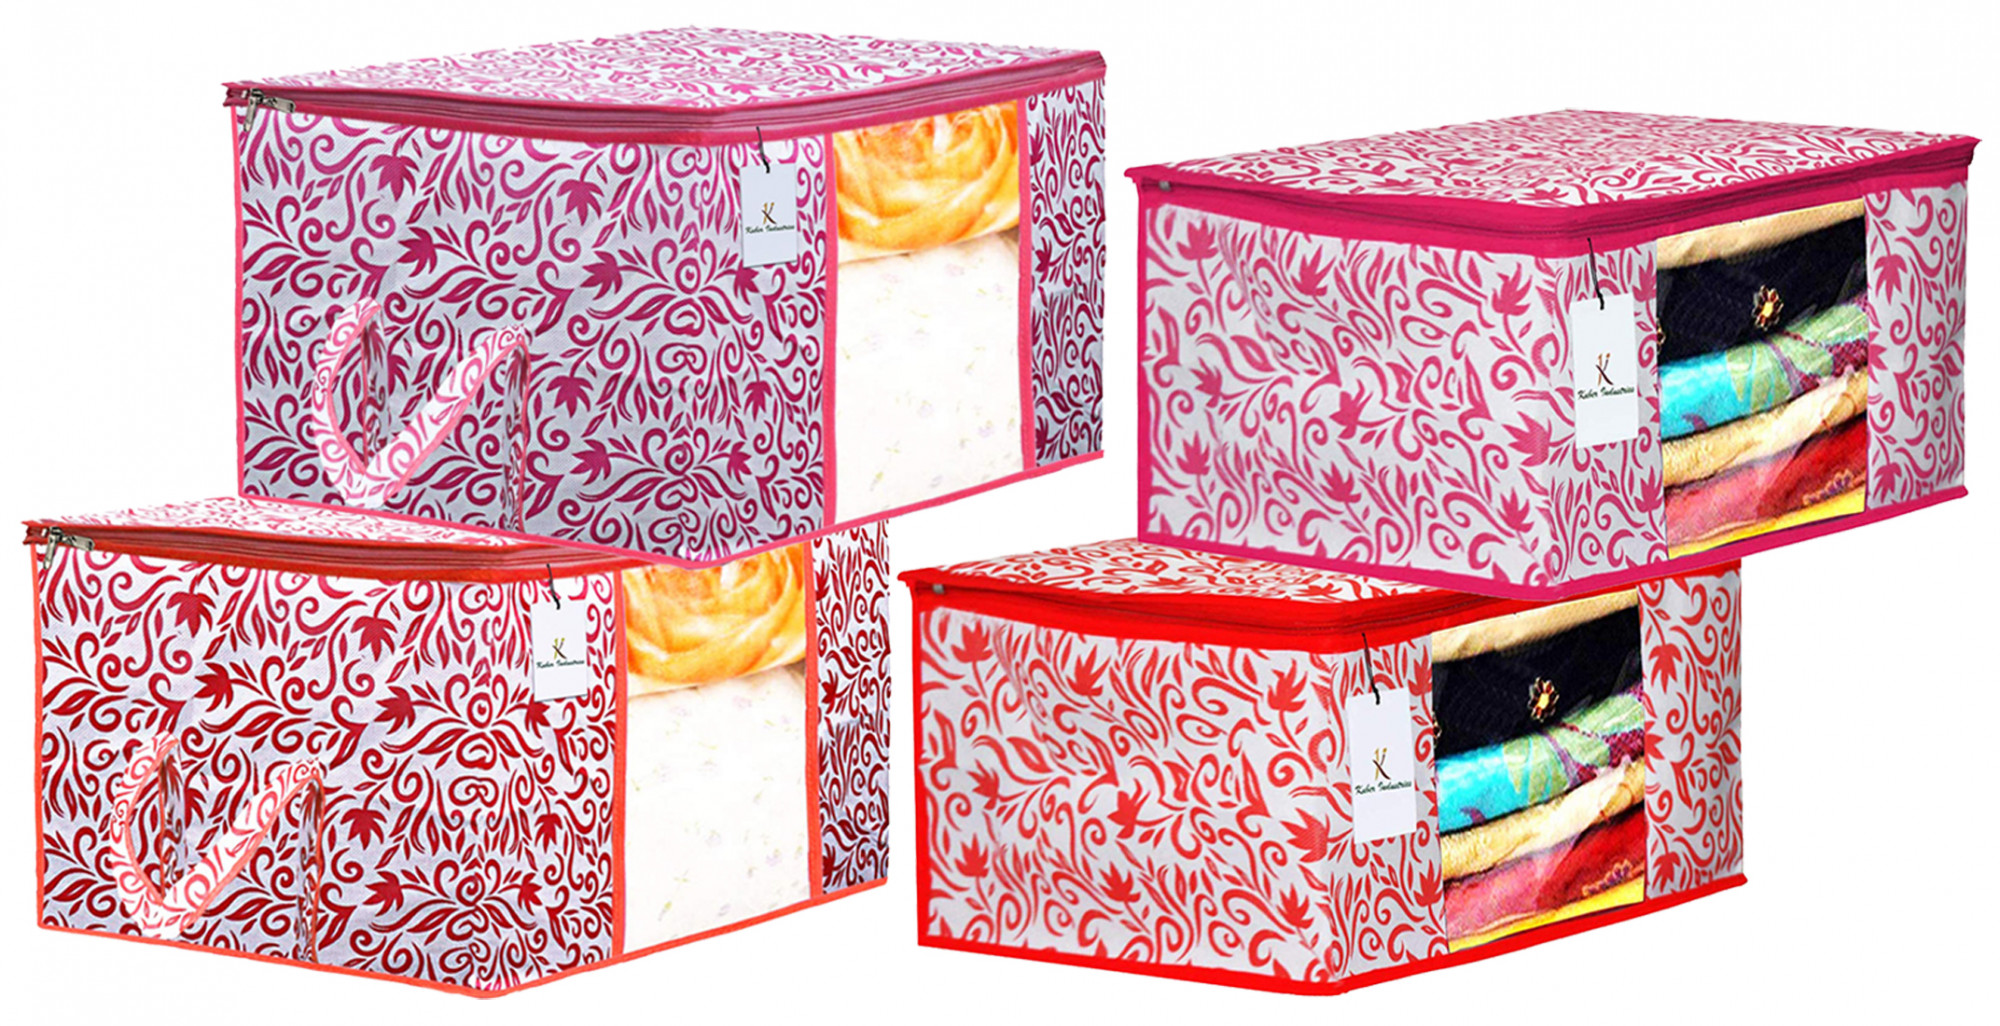 Kuber Industries Leaf DesignNon Woven Saree Cover And Underbed Storage Bag, Storage Organiser, Blanket Cover, Red & Pink  -CTKTC42369